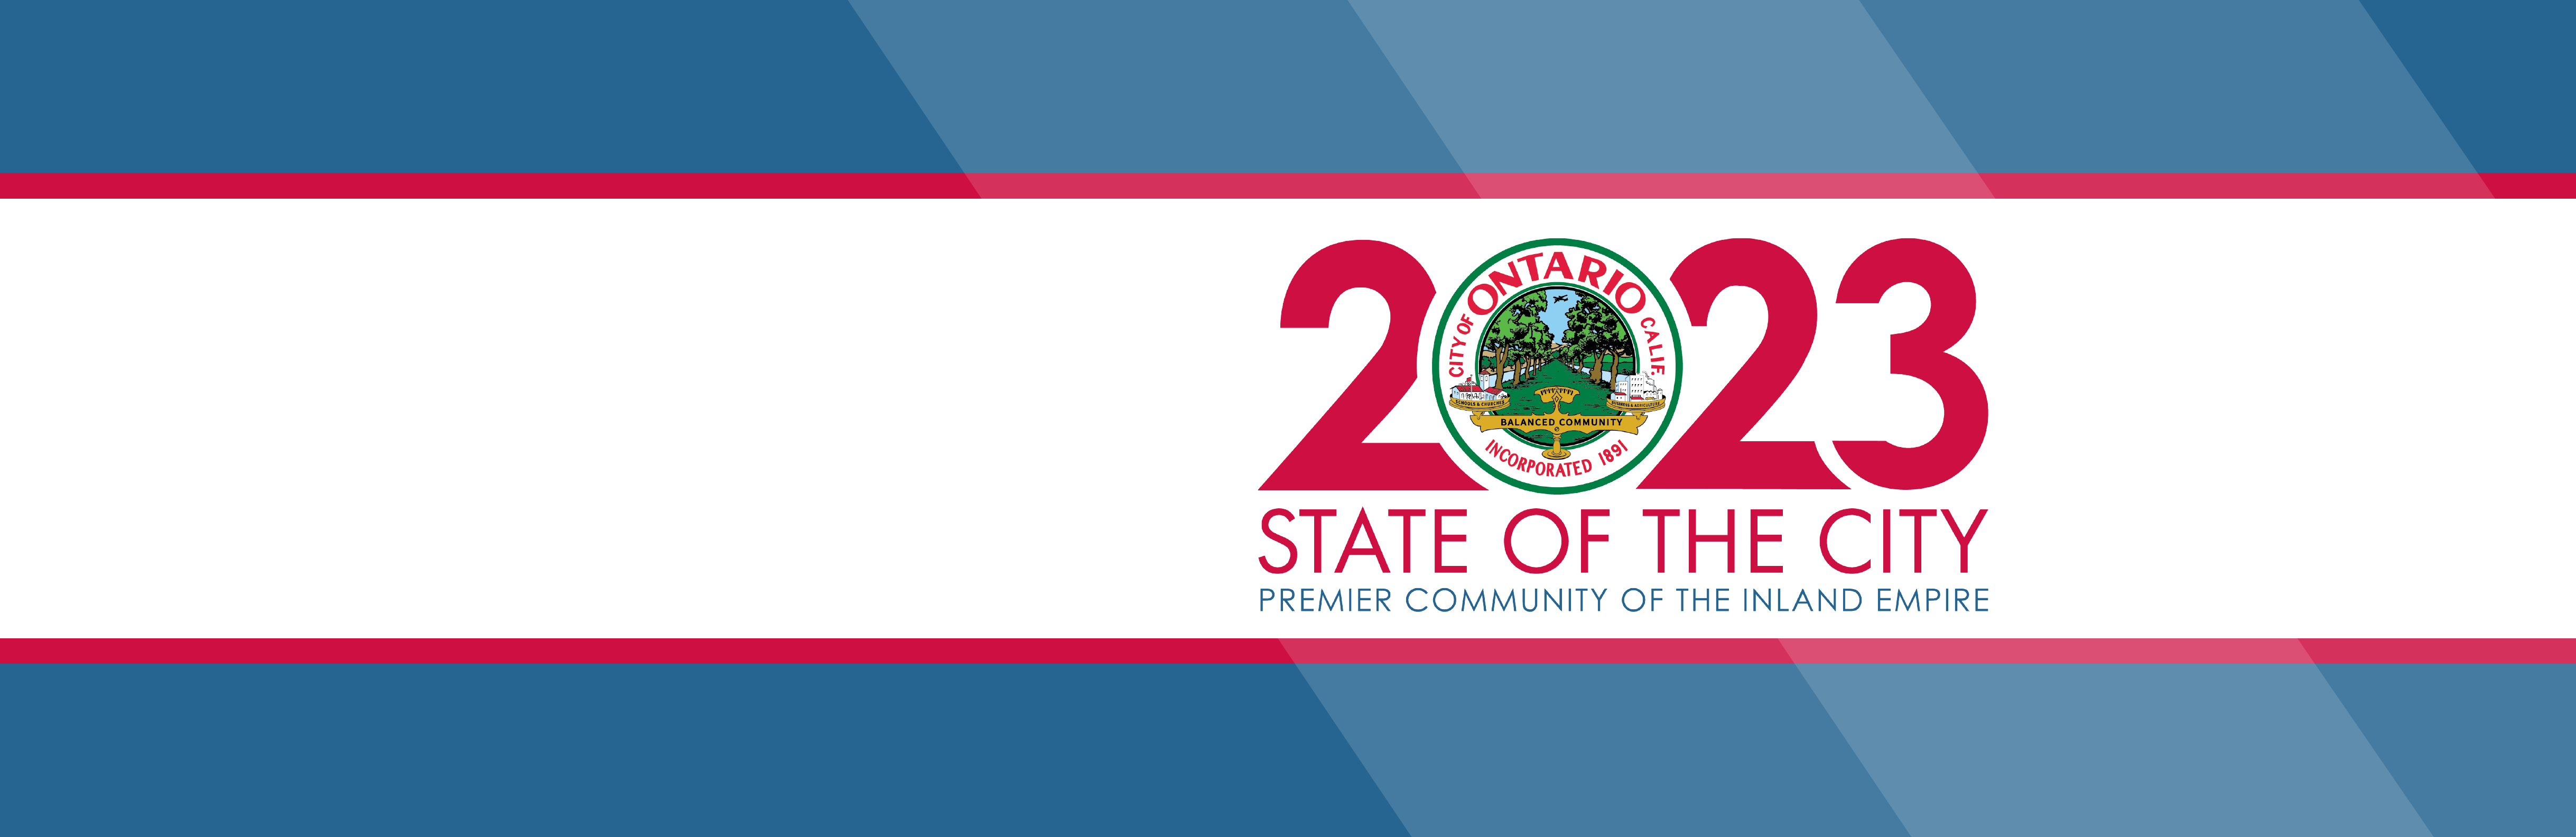 2023 State of the City web banner